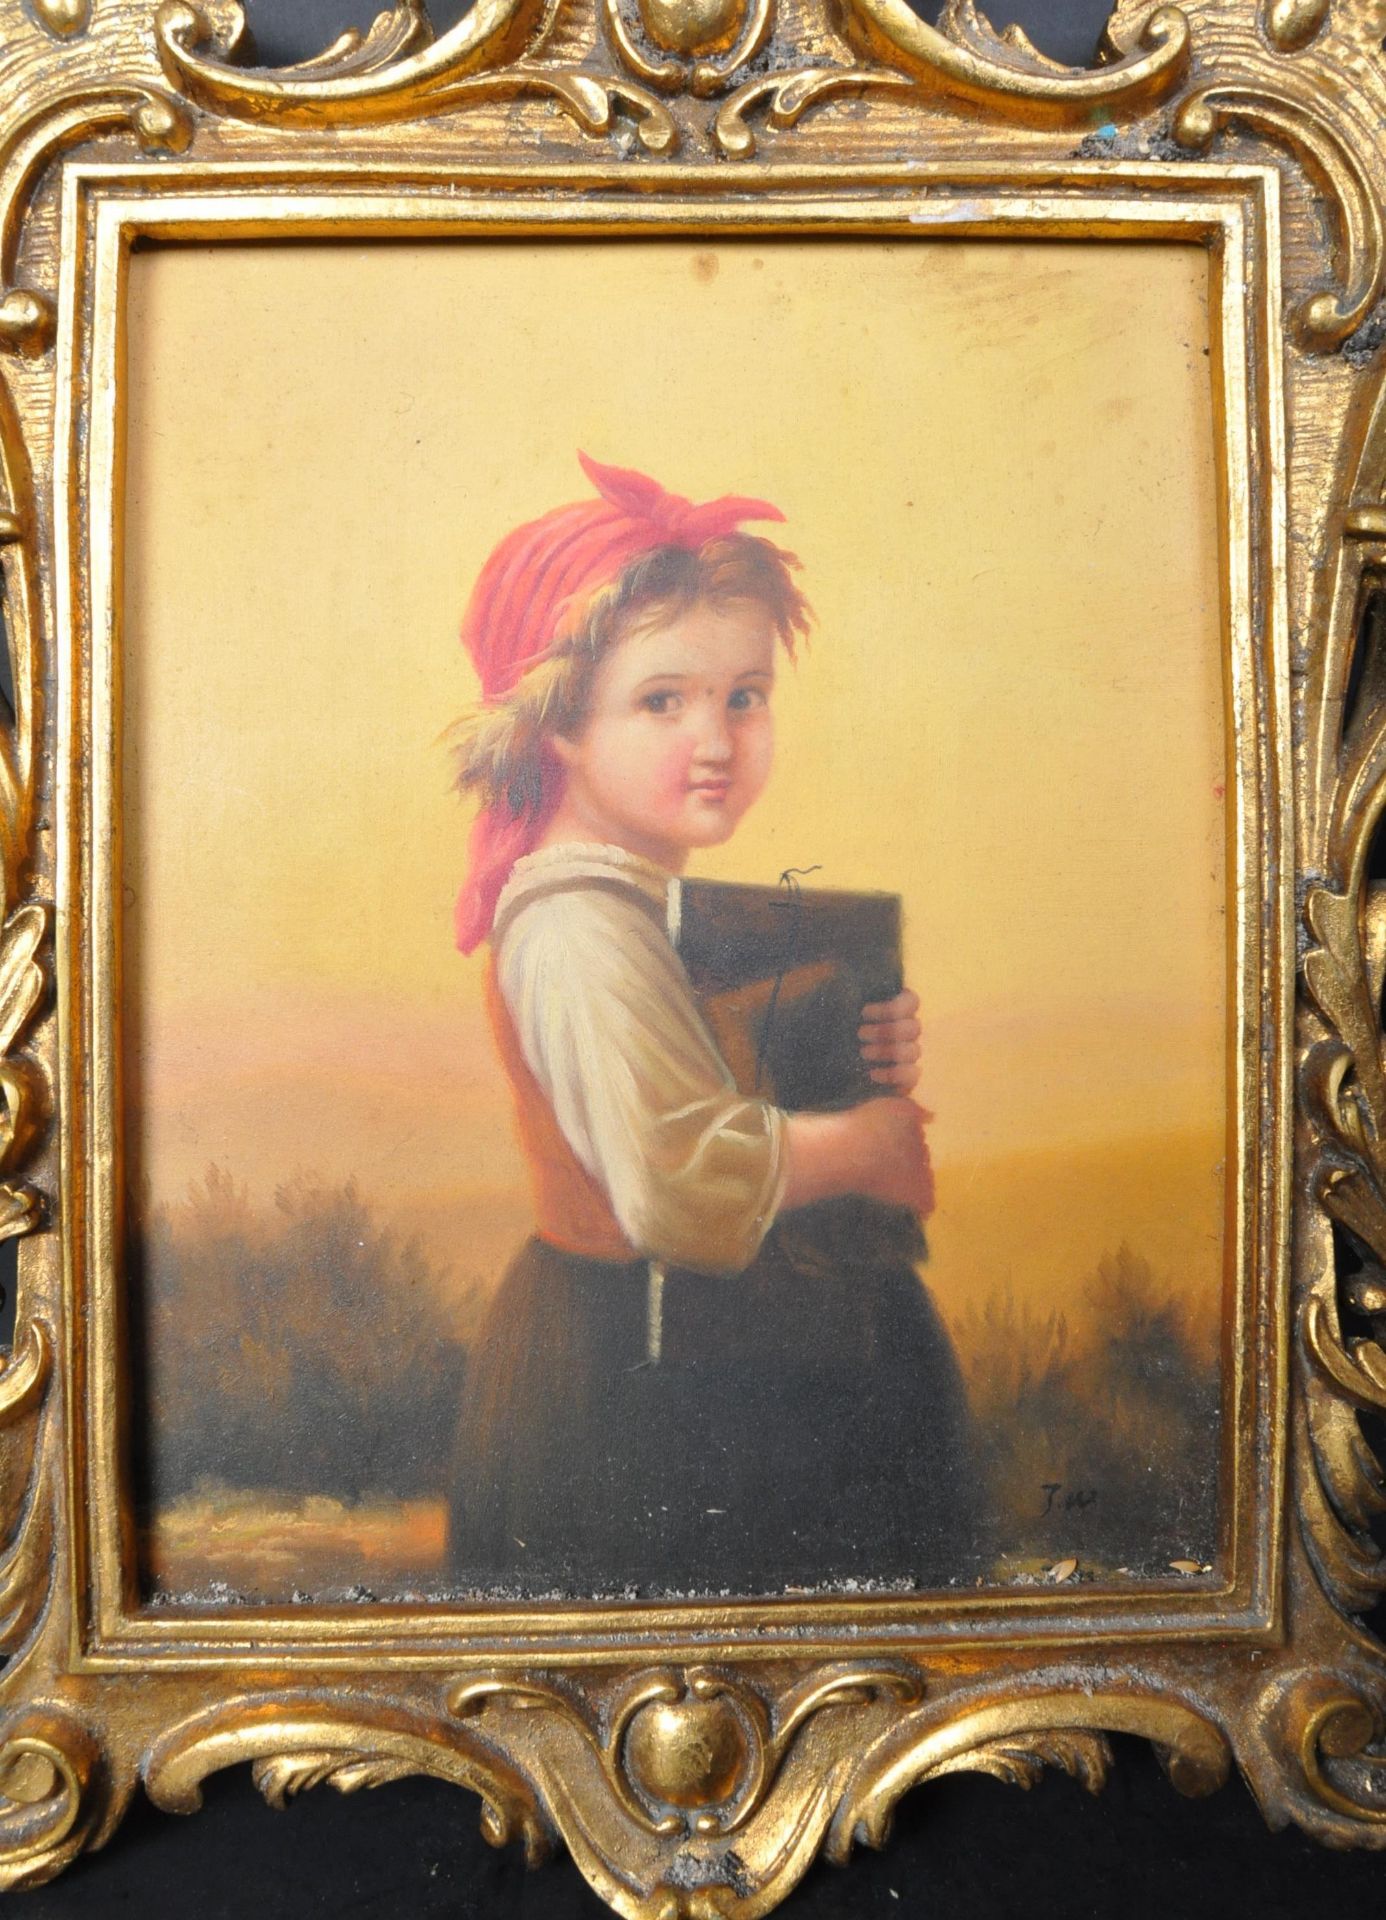 EDWARDIAN OIL ON BOARD PAINTING - GIRL HOLDING BOOK - Image 2 of 5